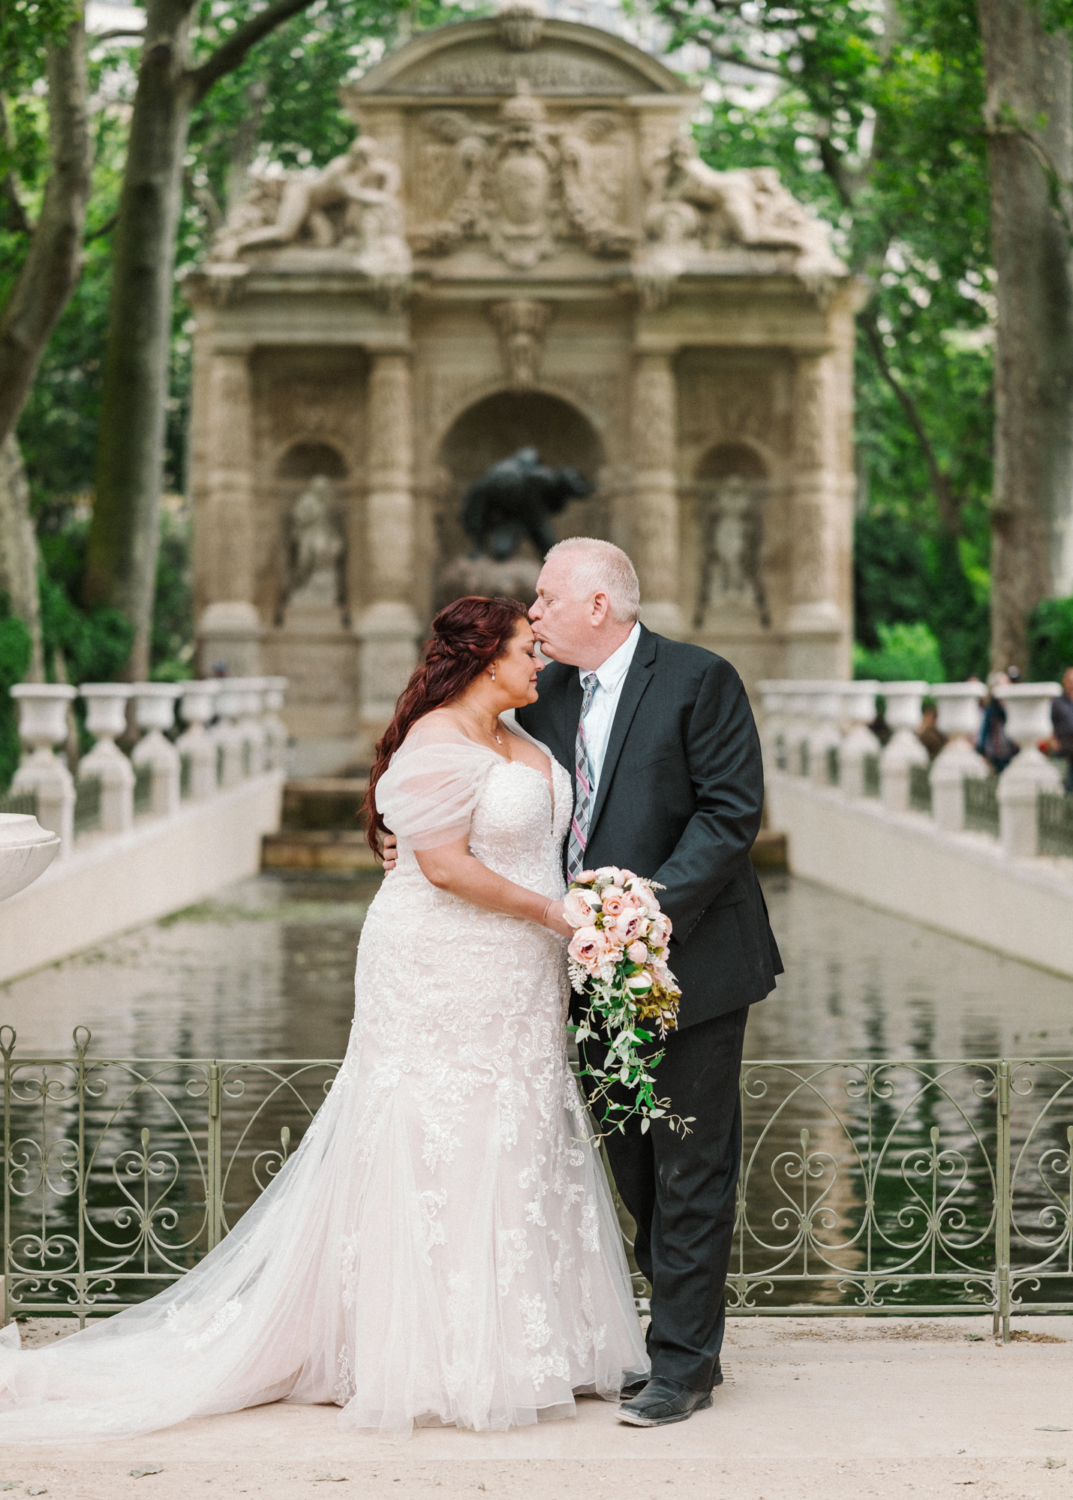 groom kisses bride on forehead at medici fountain in luxembourg gardens